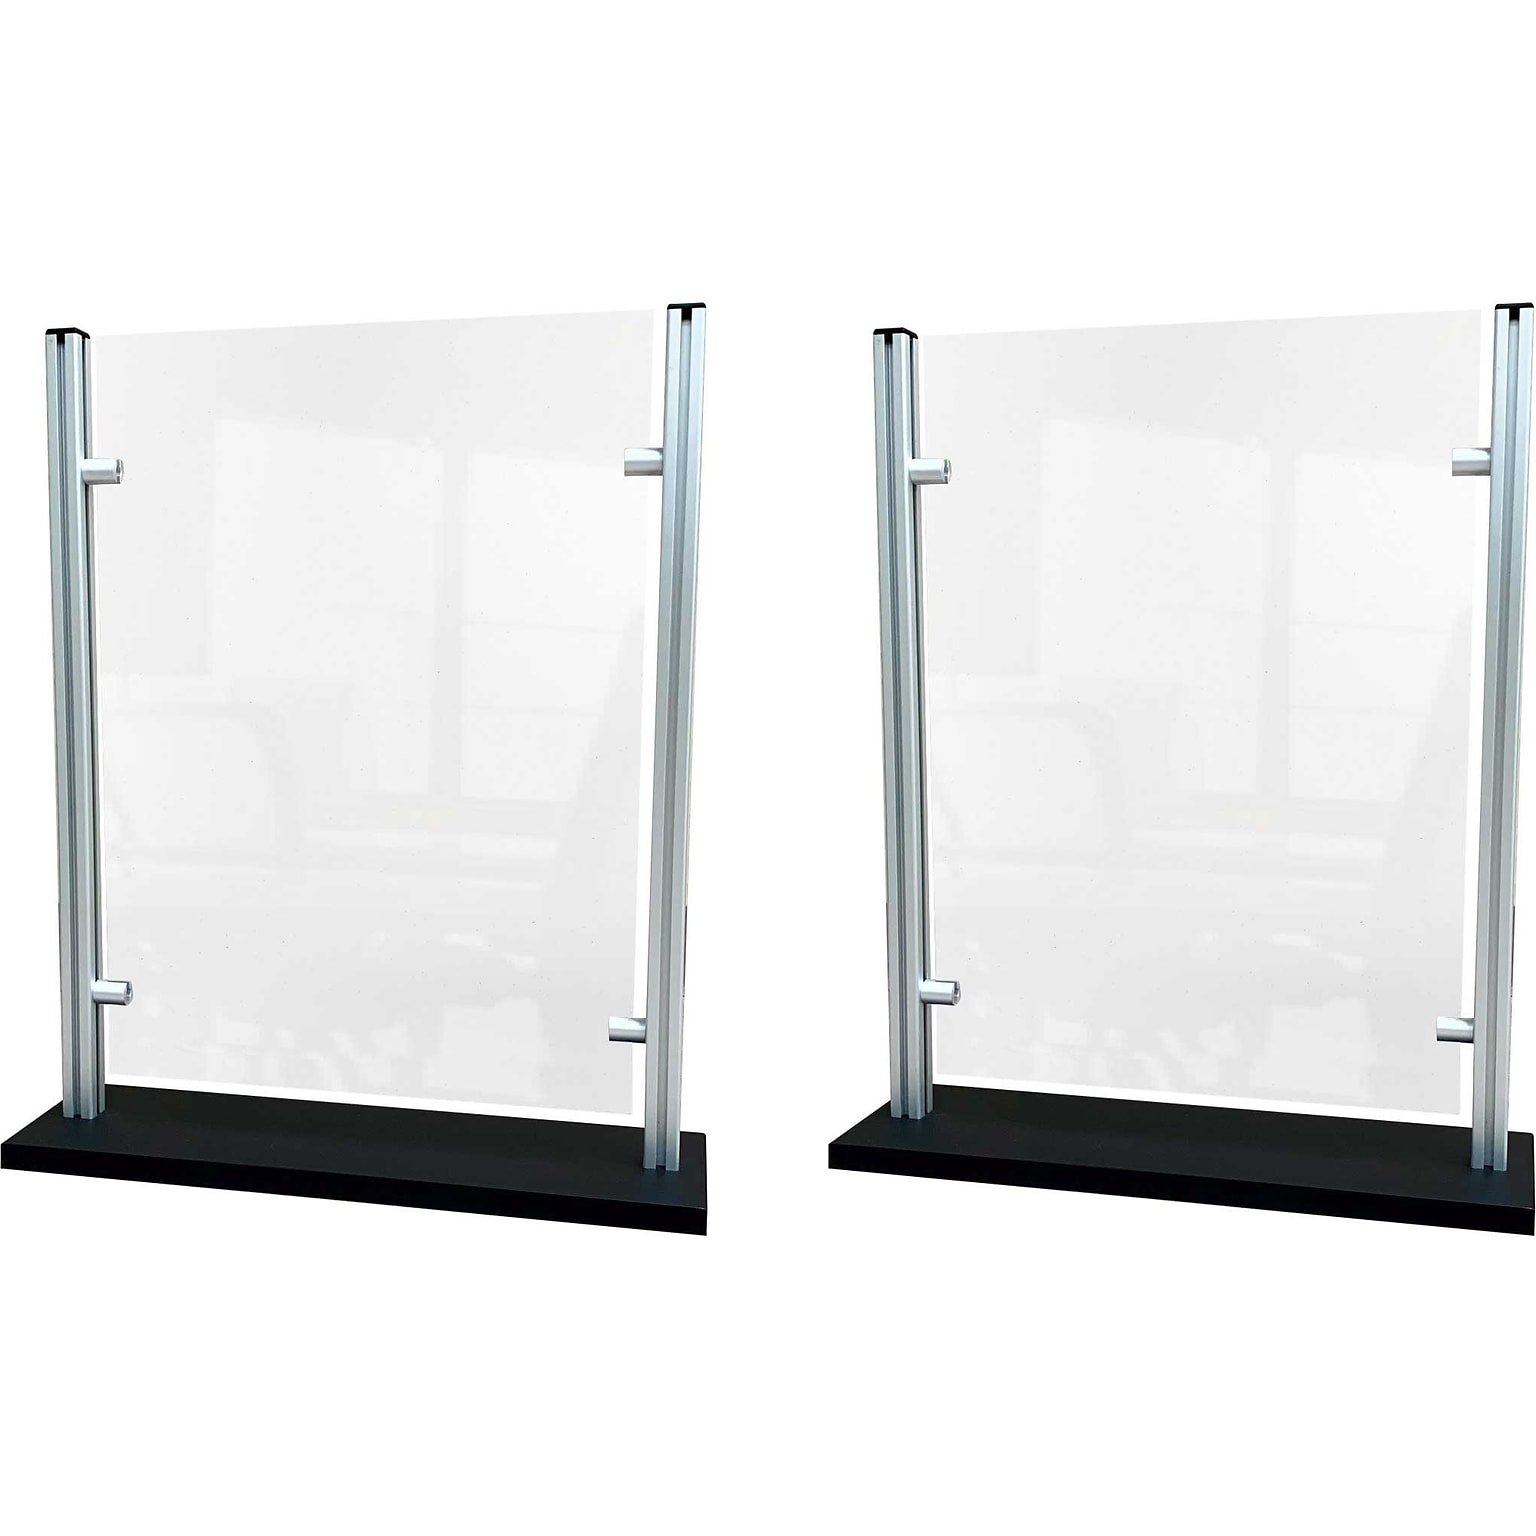 Waddell Freestanding Sneeze Guard, 24H x 19W, Clear Thermoplastic, 2/Pack (SG3-2)